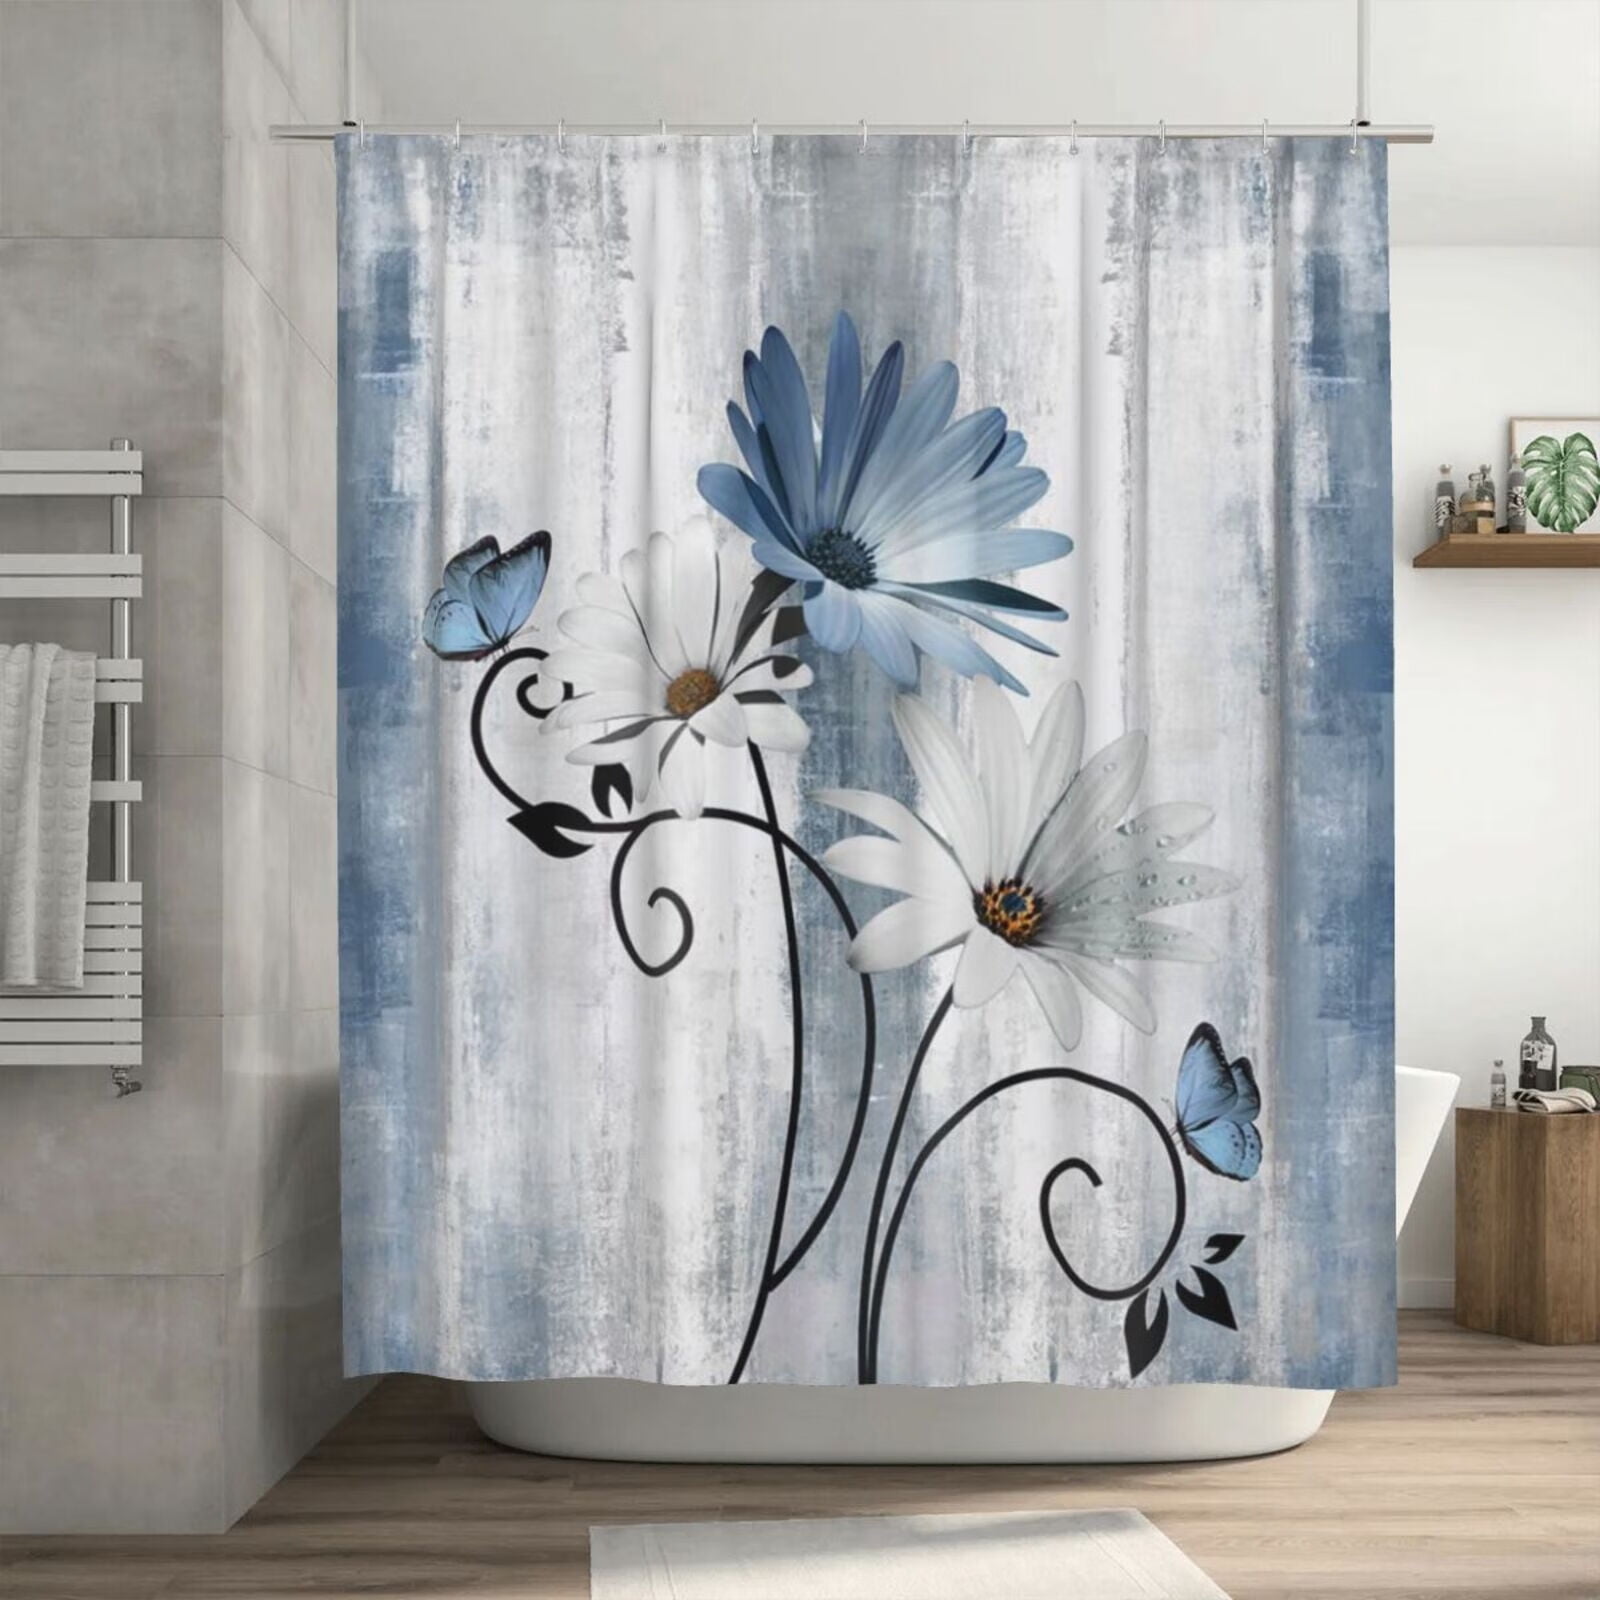 Blooming Field Shower Curtain  Hallway to bedrooms, Curtains, Pretty  bathrooms